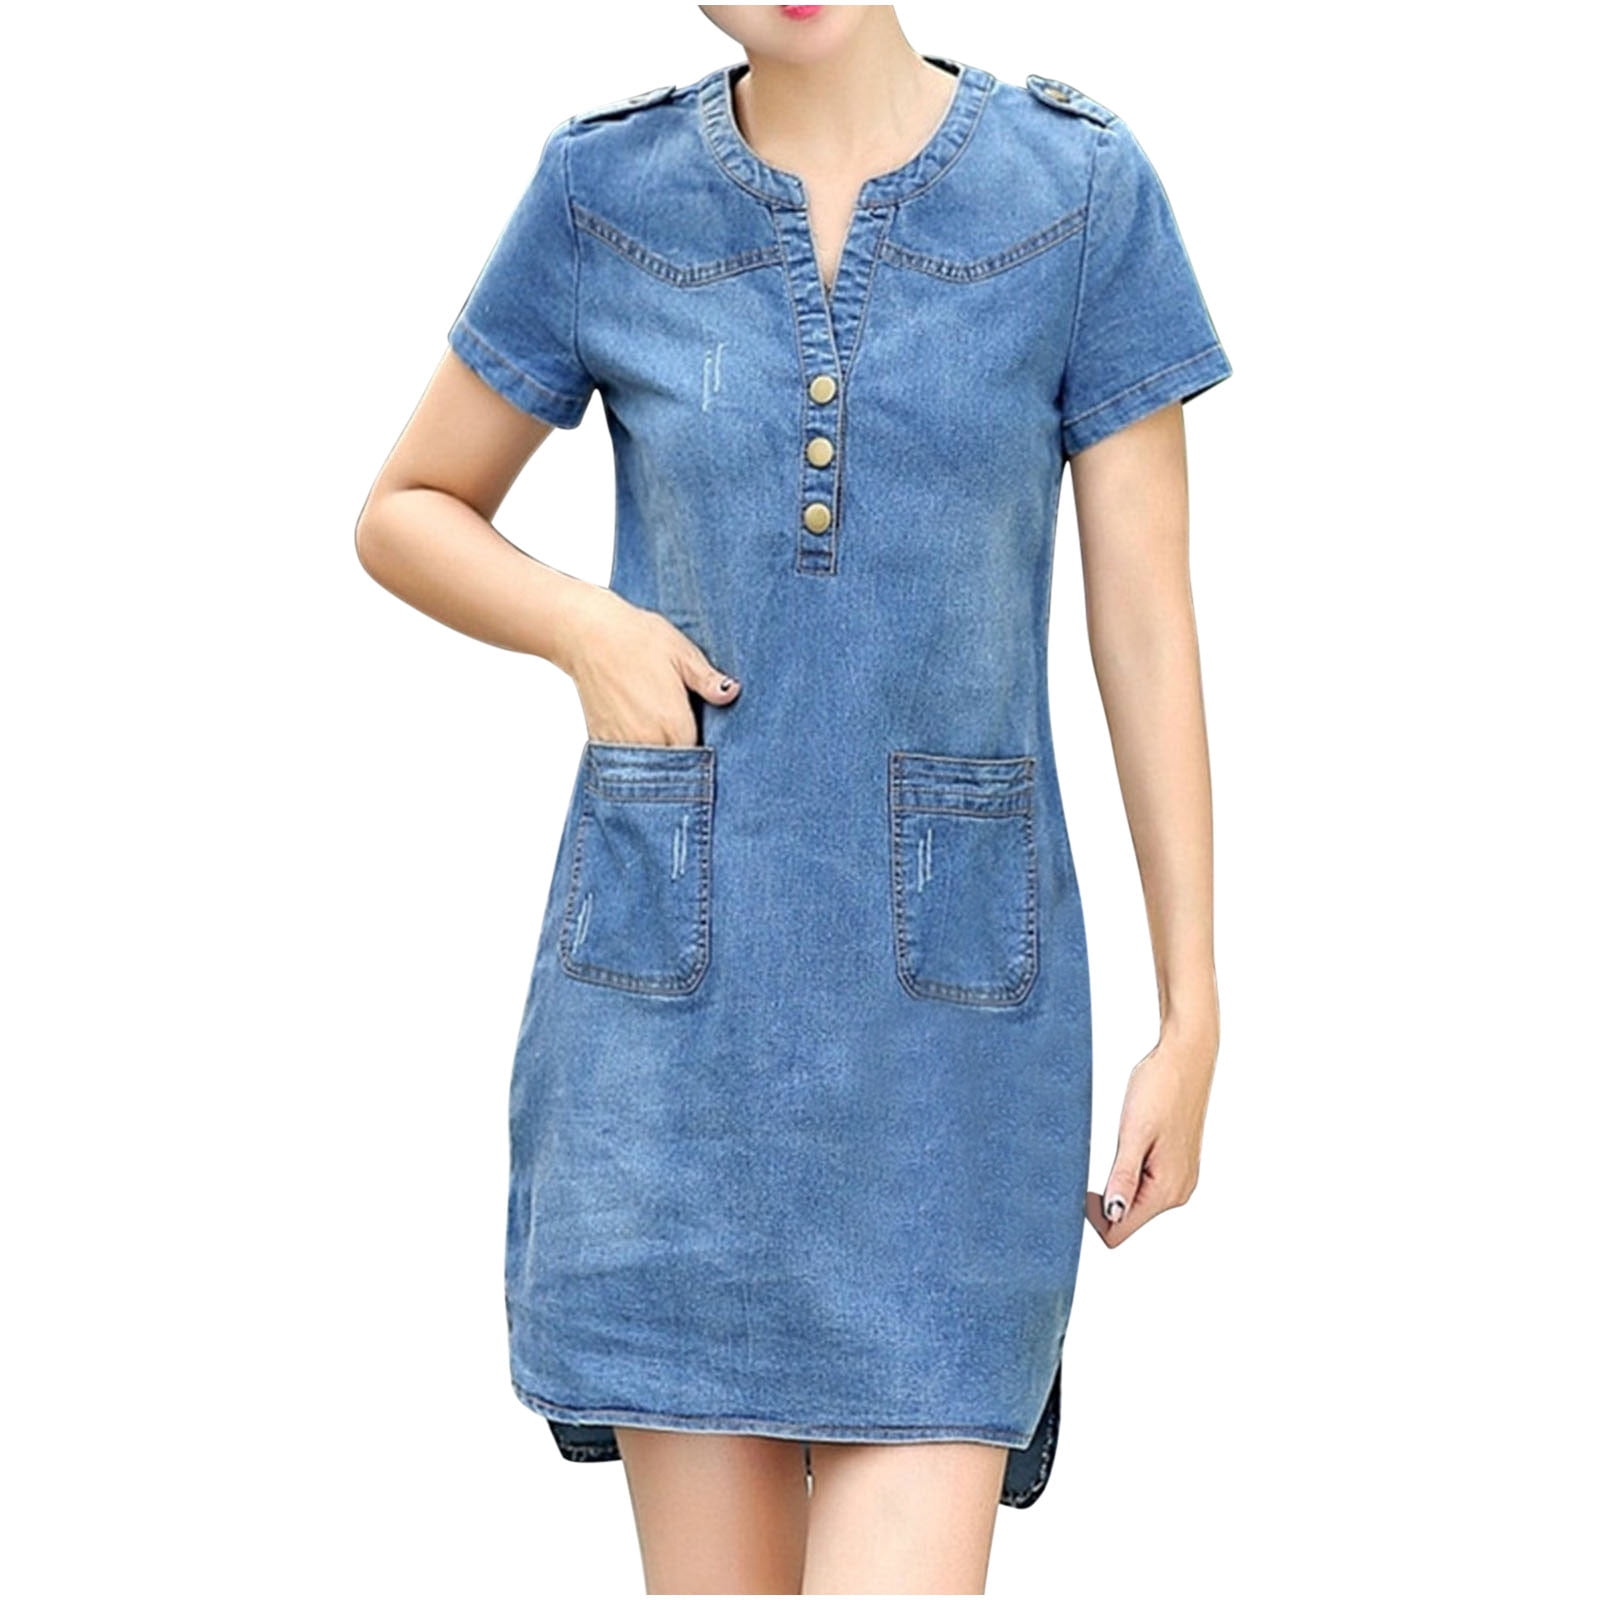 Funicet Holiday Savings! Jeans Dresses for Women Clearance Women's ...